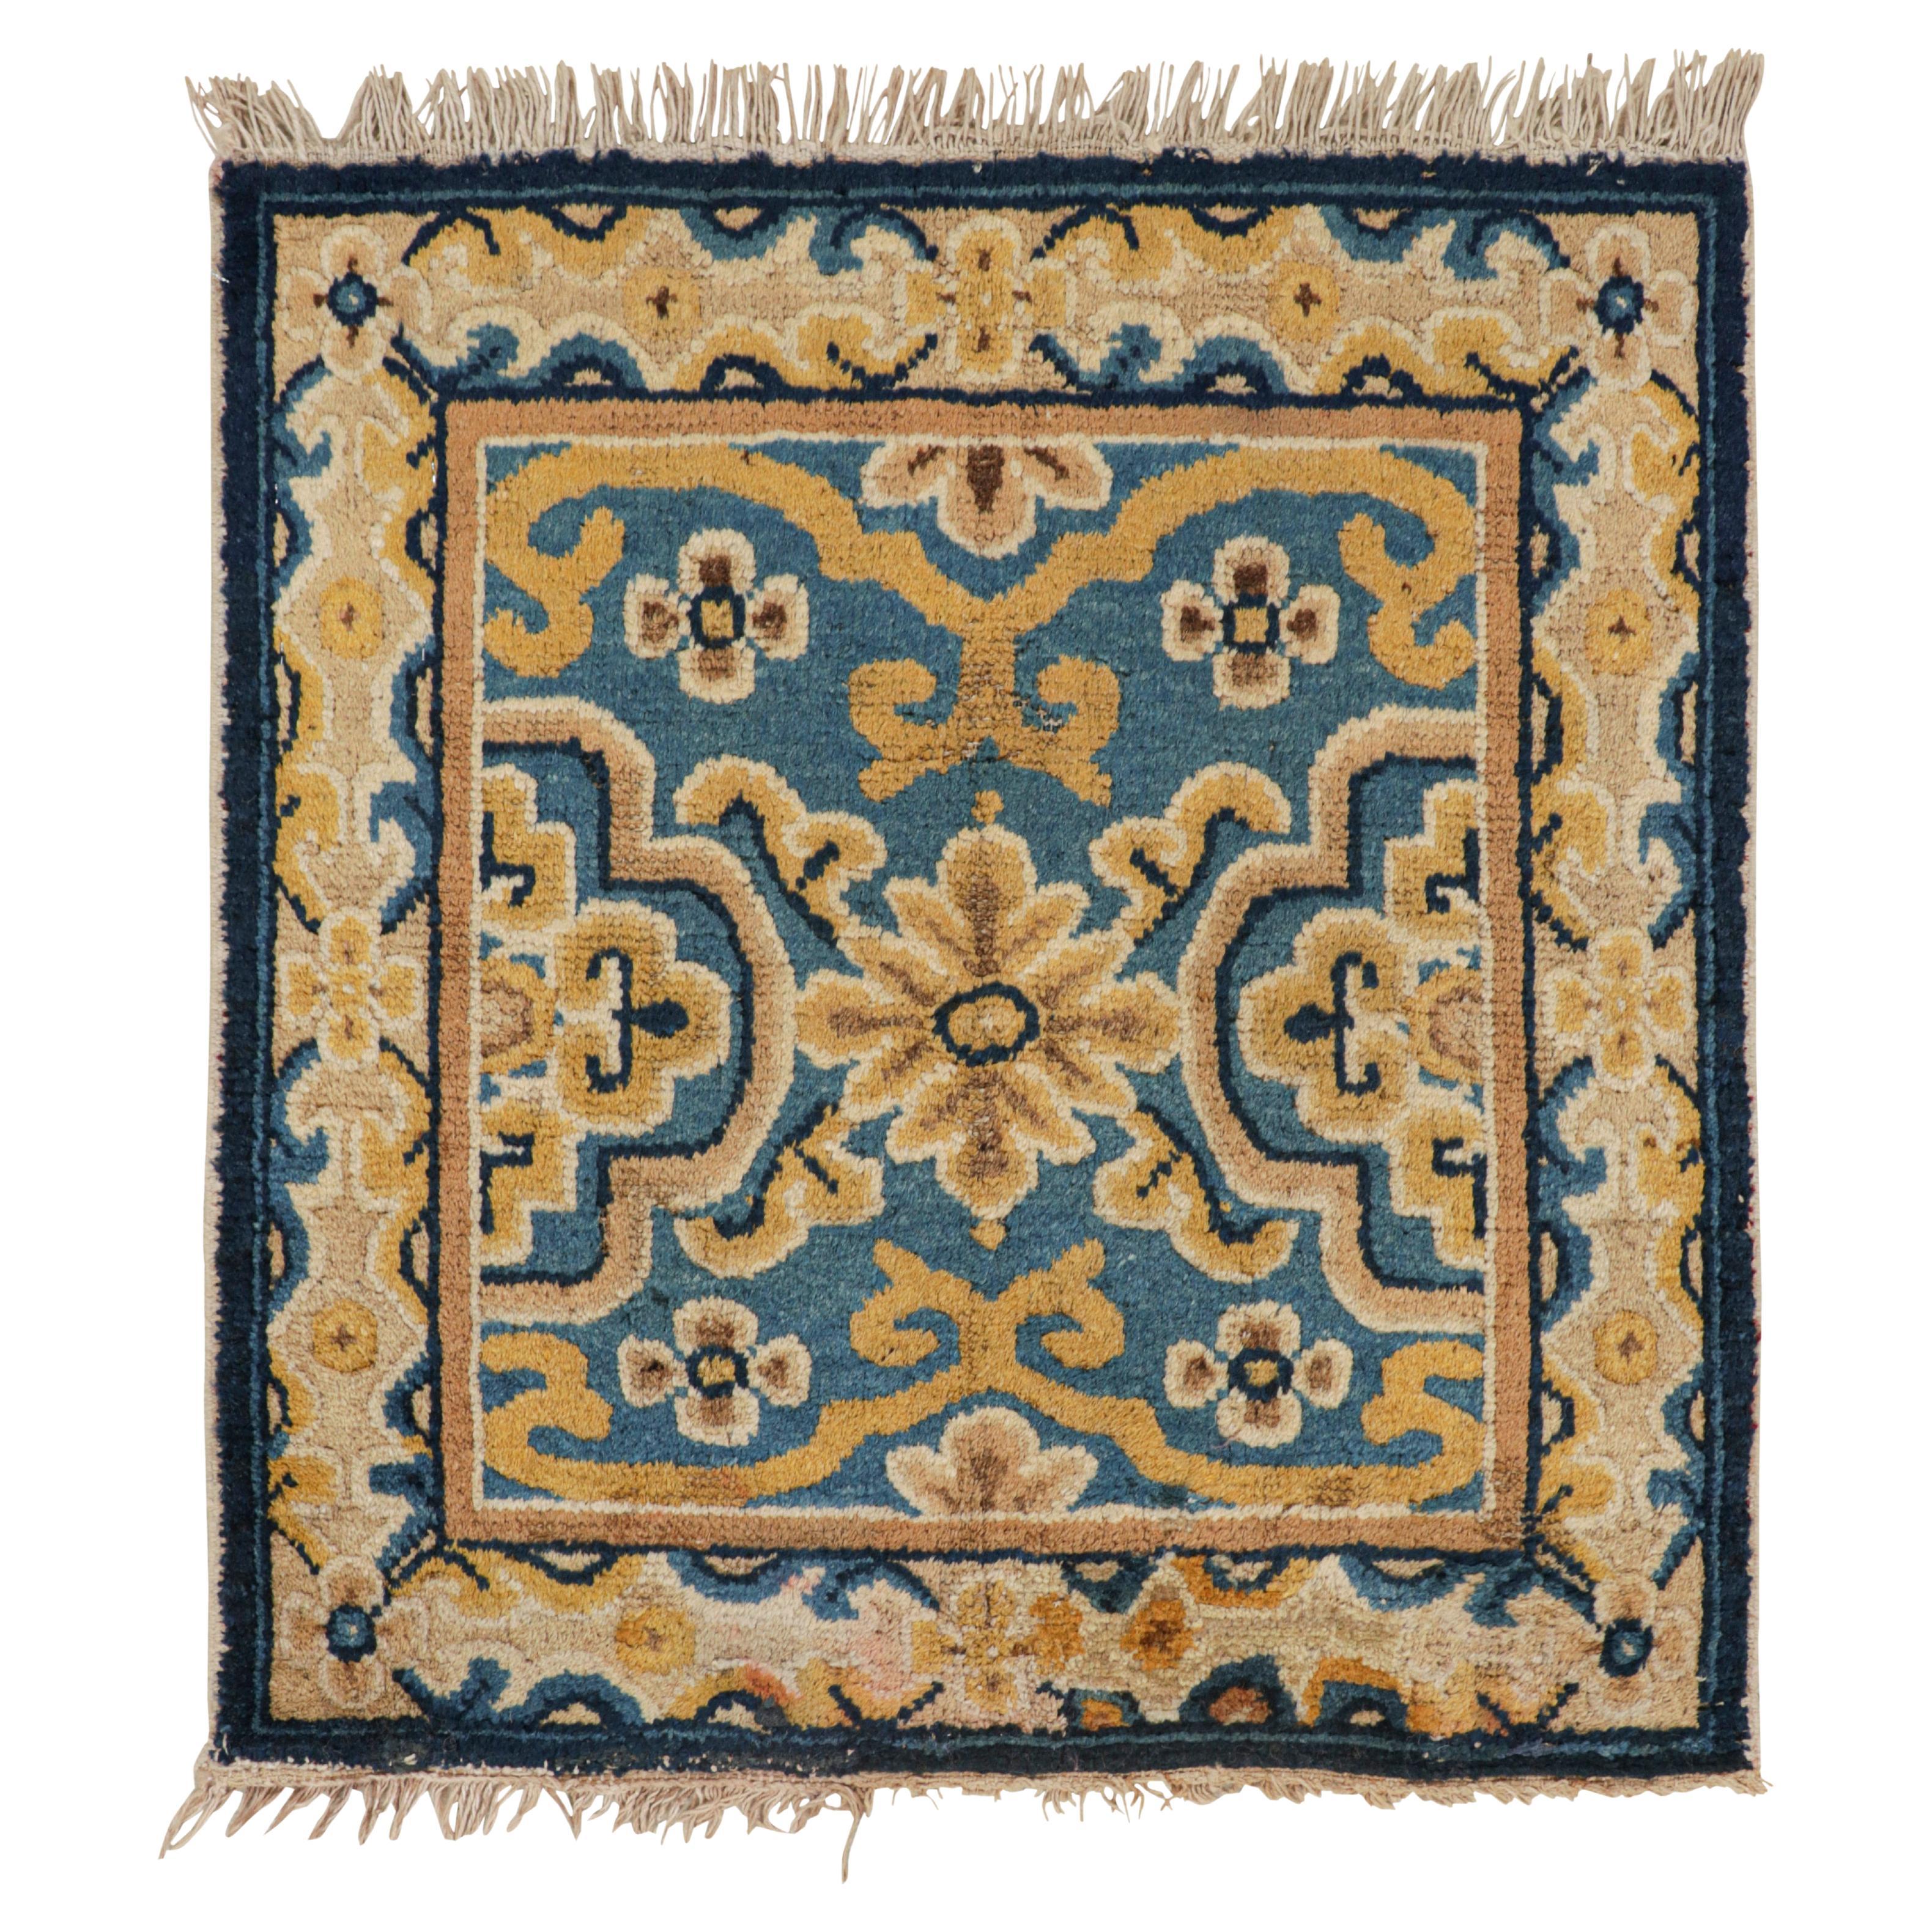 Antique Ningxia Square Rug in Blue with Gold Floral Patterns, from Rug & Kilim